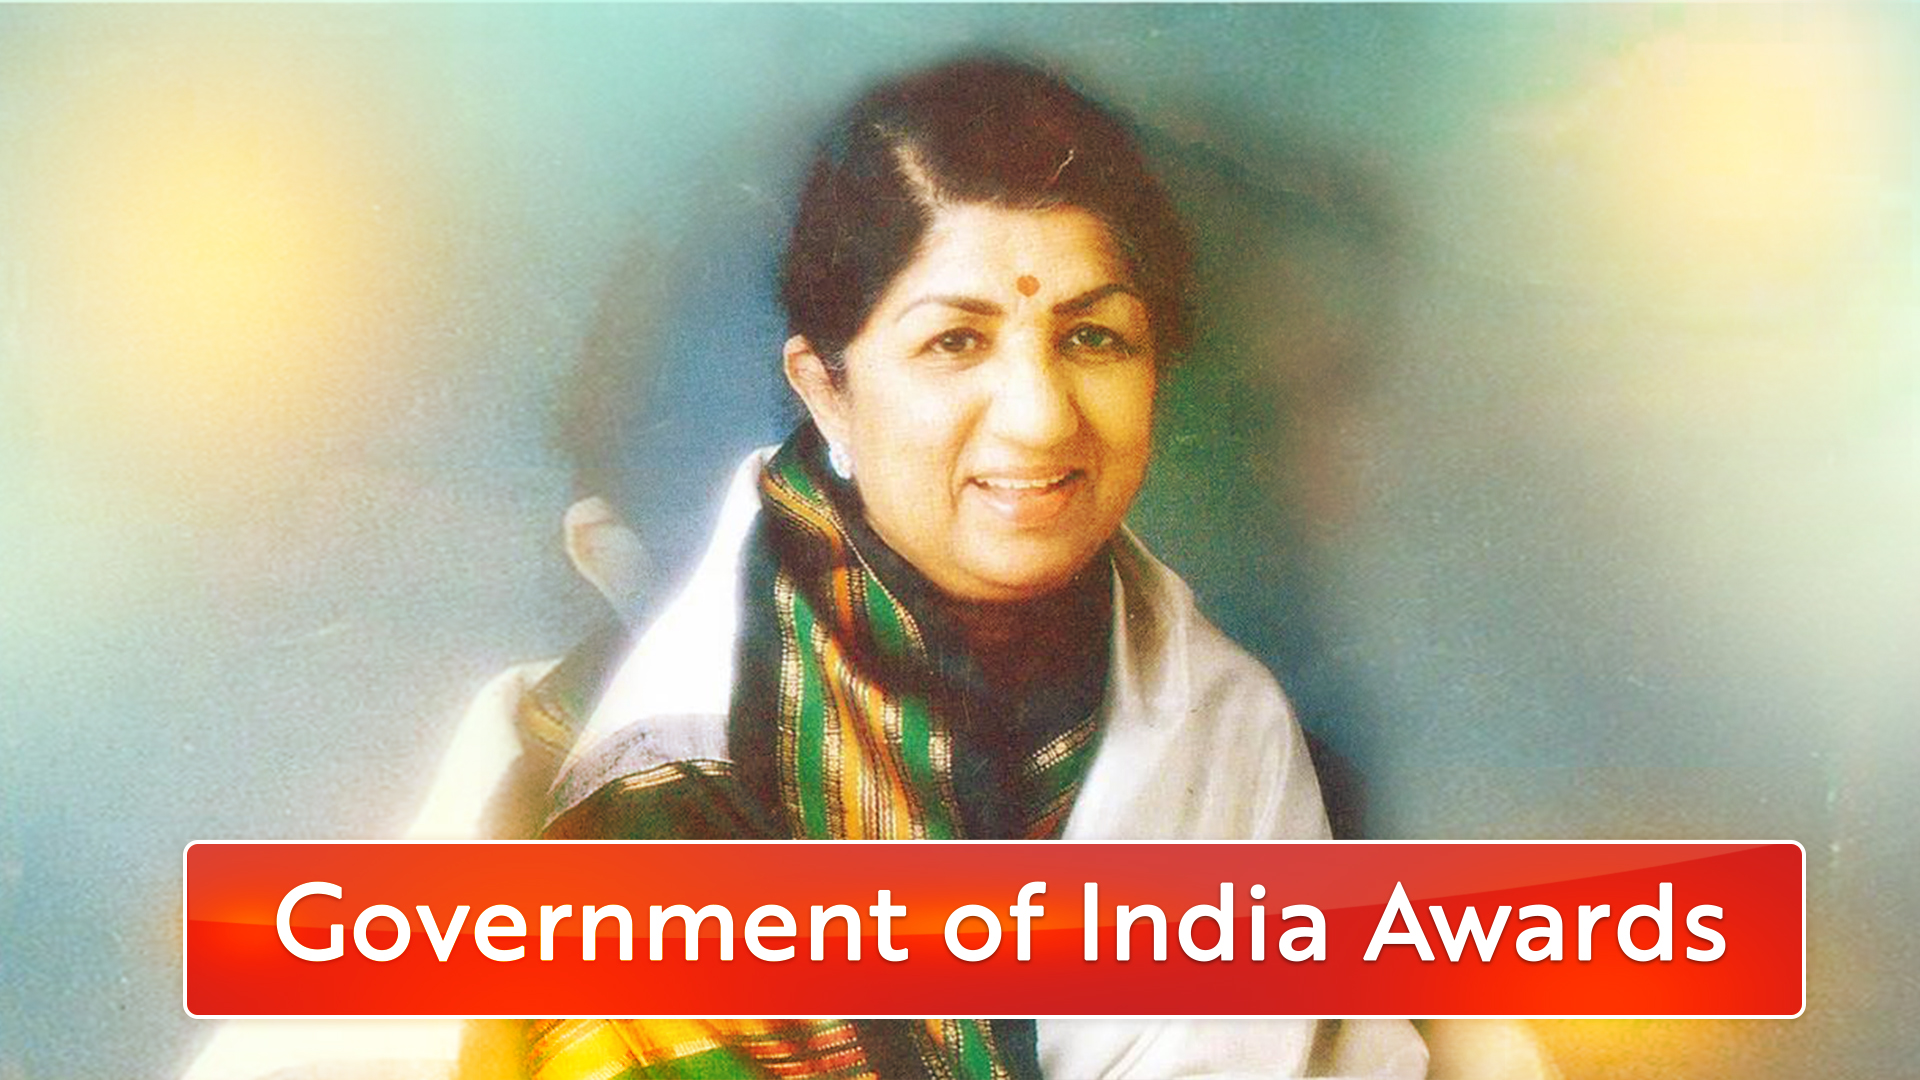 Government of India Awards